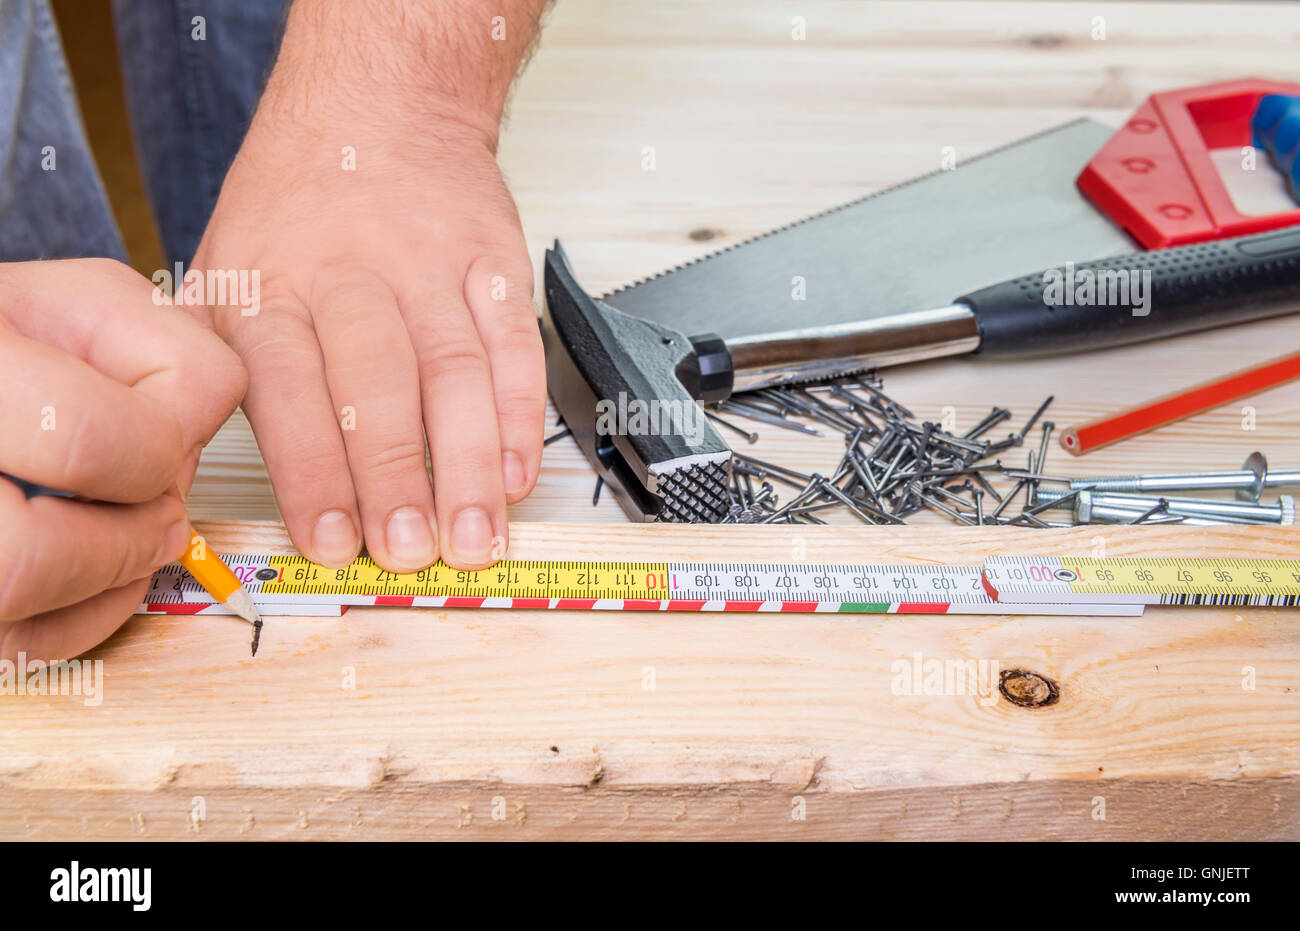 Woodworker hands and carpentry tools Stock Photo